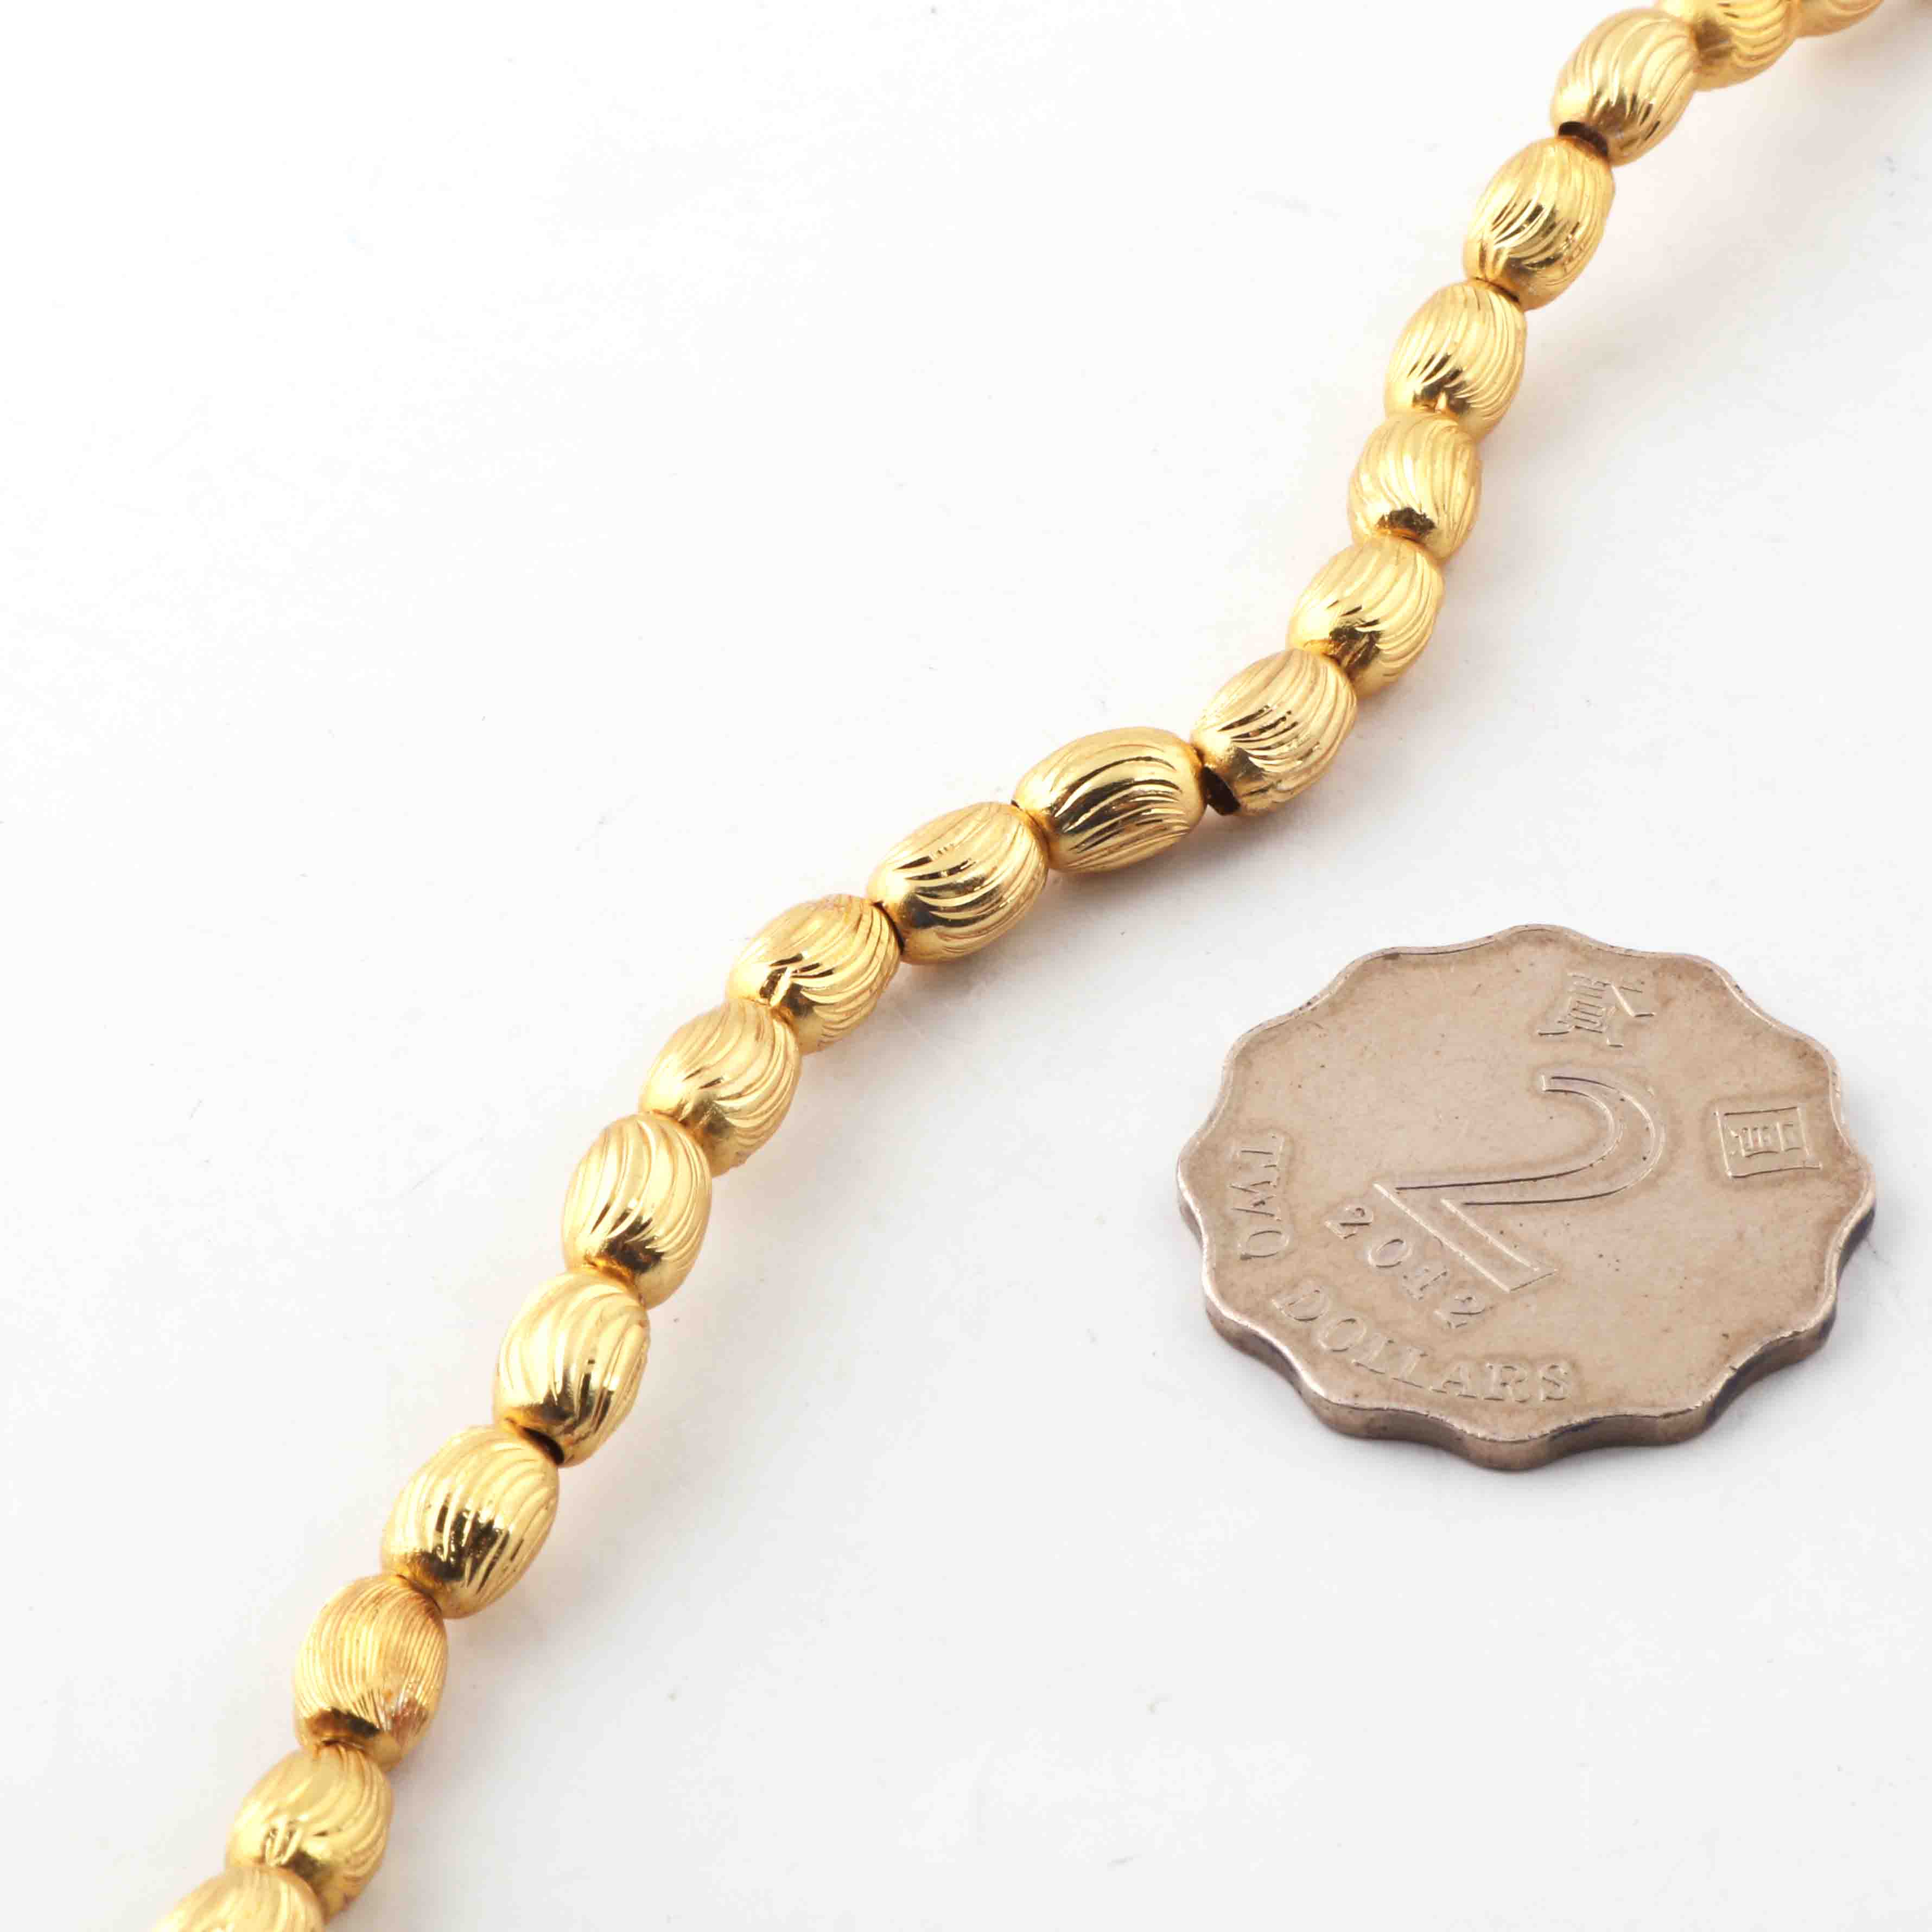 5 Strands Gold Plated Designer Copper Beads, Casting Copper Beads, Jewelry  Making Supplies 6mm-8mm 8.5inches GPC378